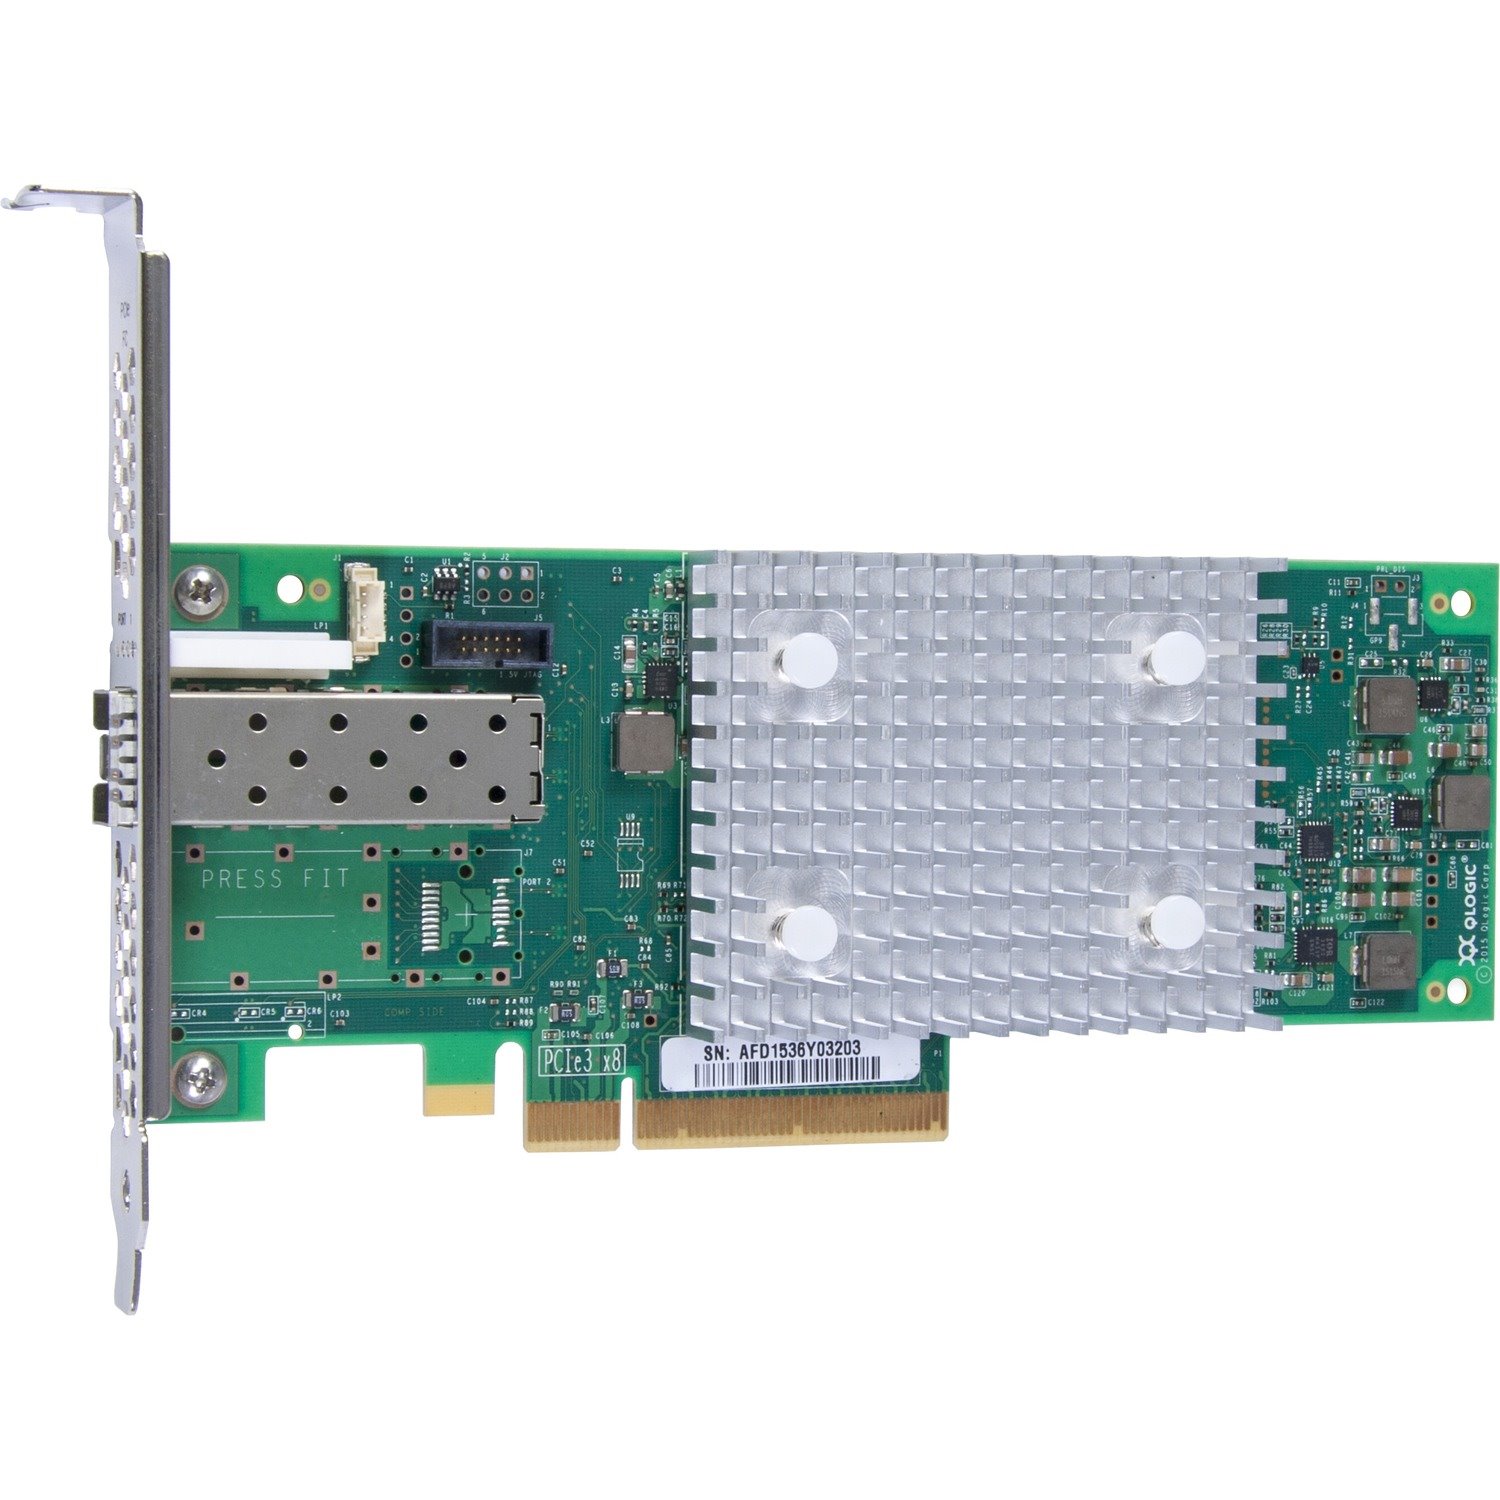 HPE StoreFabric SN1600Q Fibre Channel Host Bus Adapter - Plug-in Card